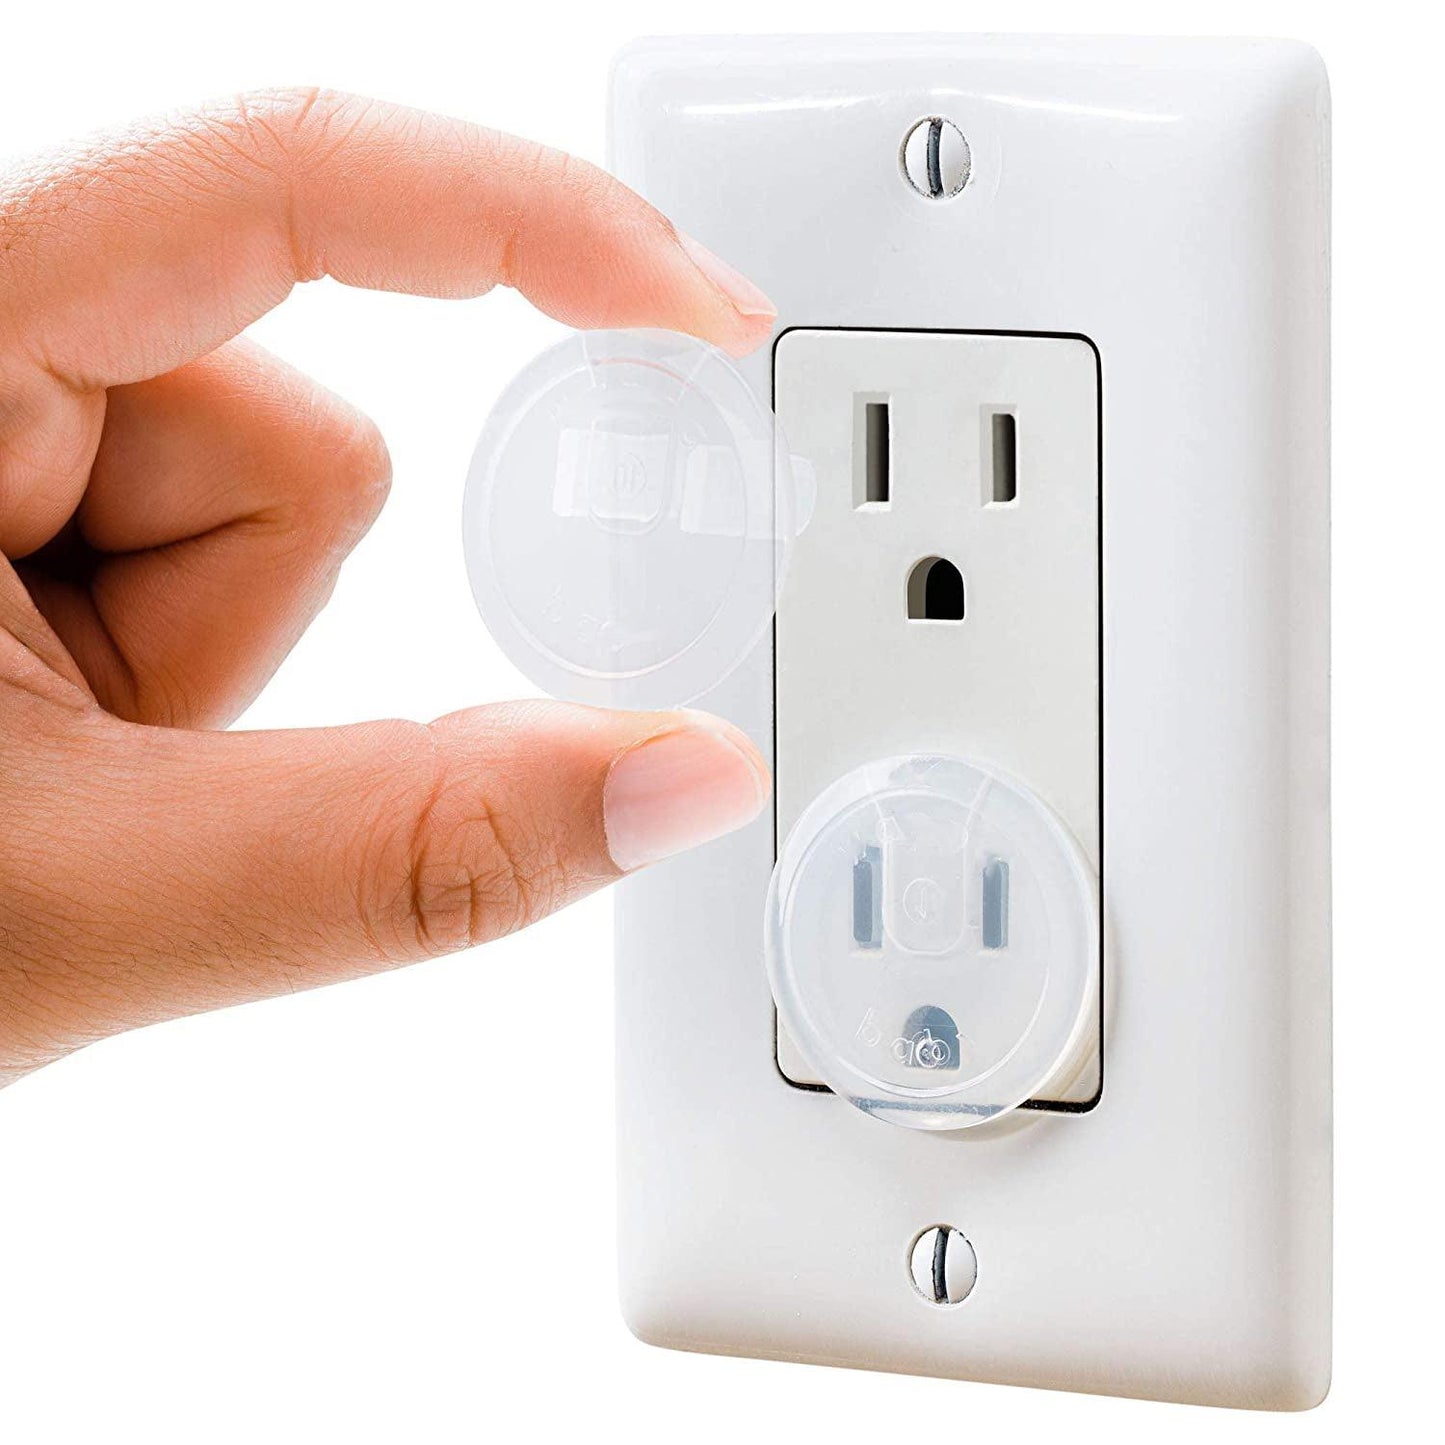 Clear Outlet Covers (50 Pack) Value Pack Baby Safety Outlet Plug Covers - If you say i do